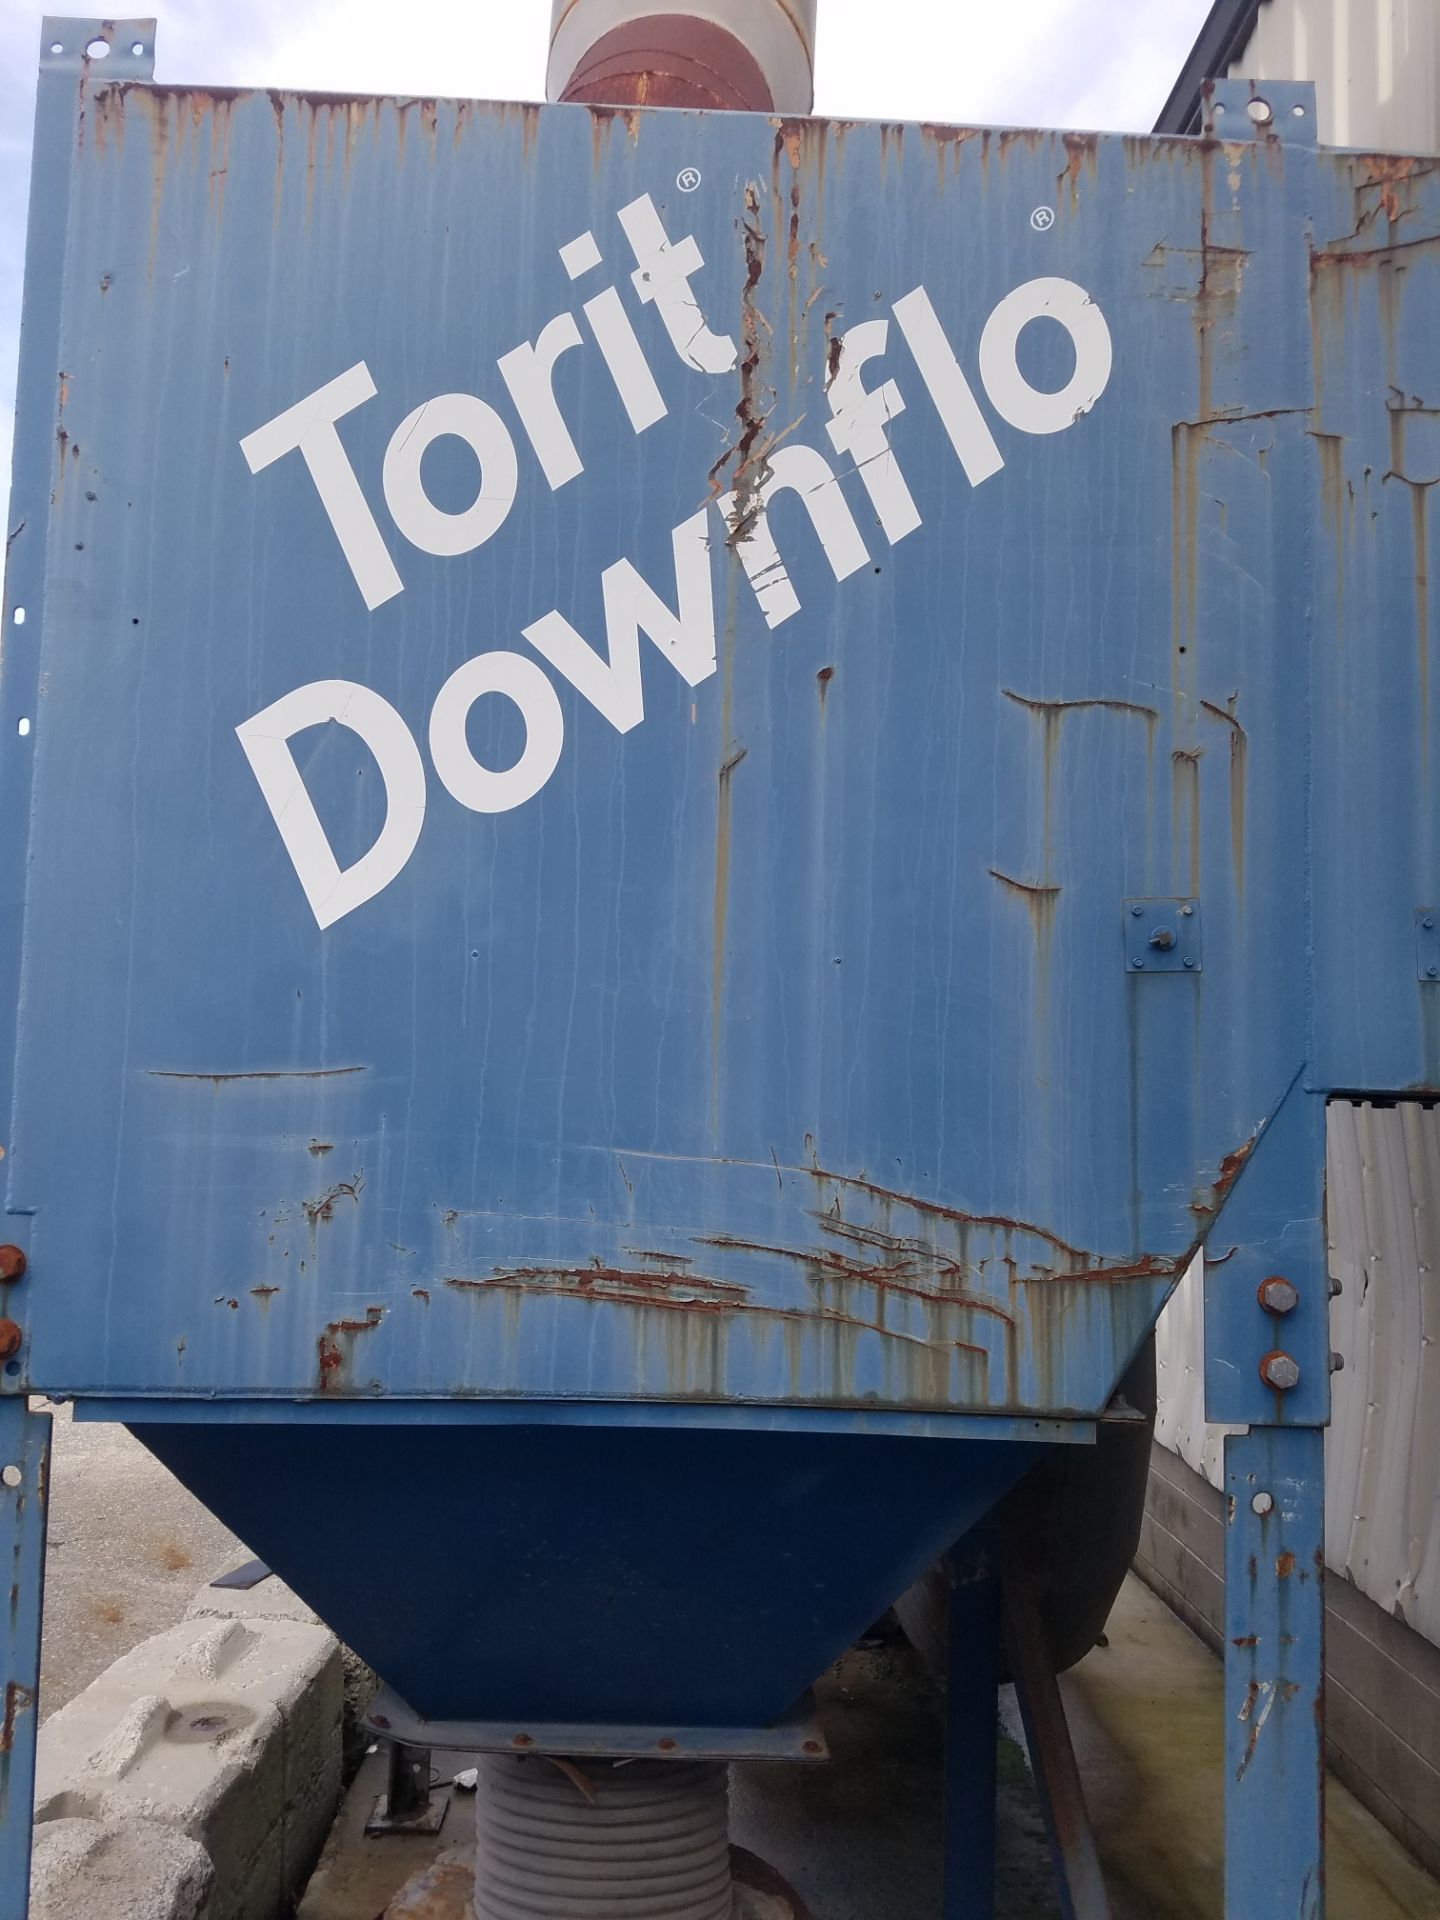 TORIT DONALDSON "DOWNFLO" MDL. 2DF24 DUST COLLECTOR, 50HP (OUTSIDE UNIT) (MILLVILLE, NJ) - Image 4 of 9